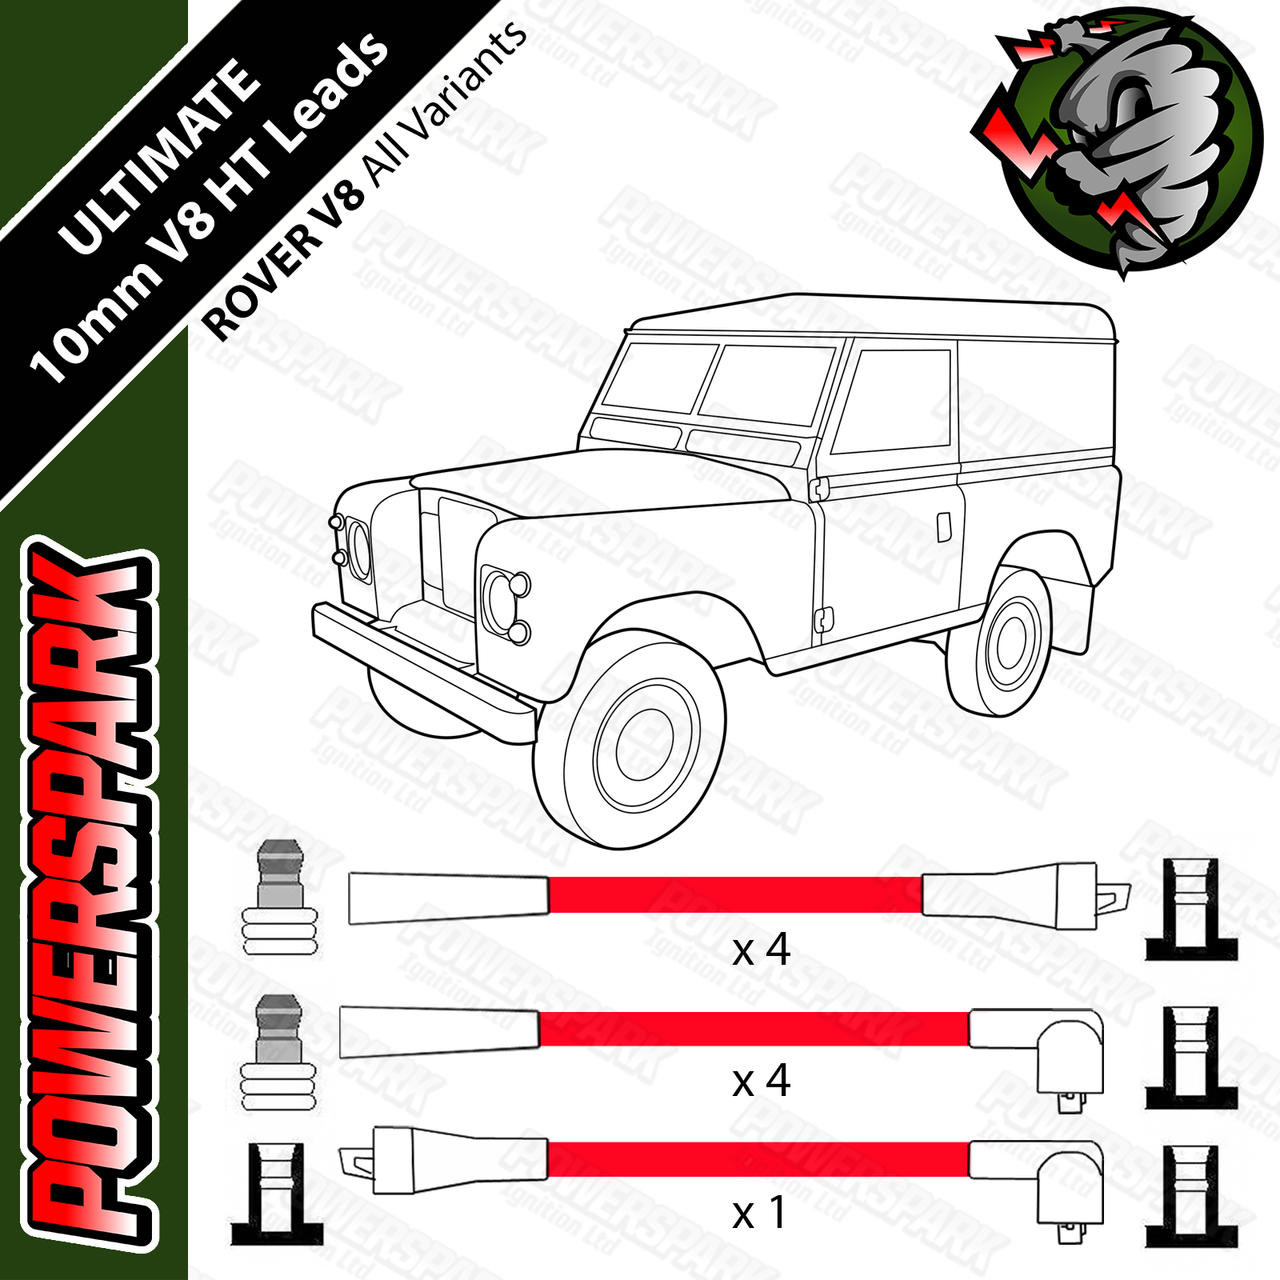 Powerspark Land Rover V8 Powercor 10mm Performance Double Silicone Race Spec HT Leads